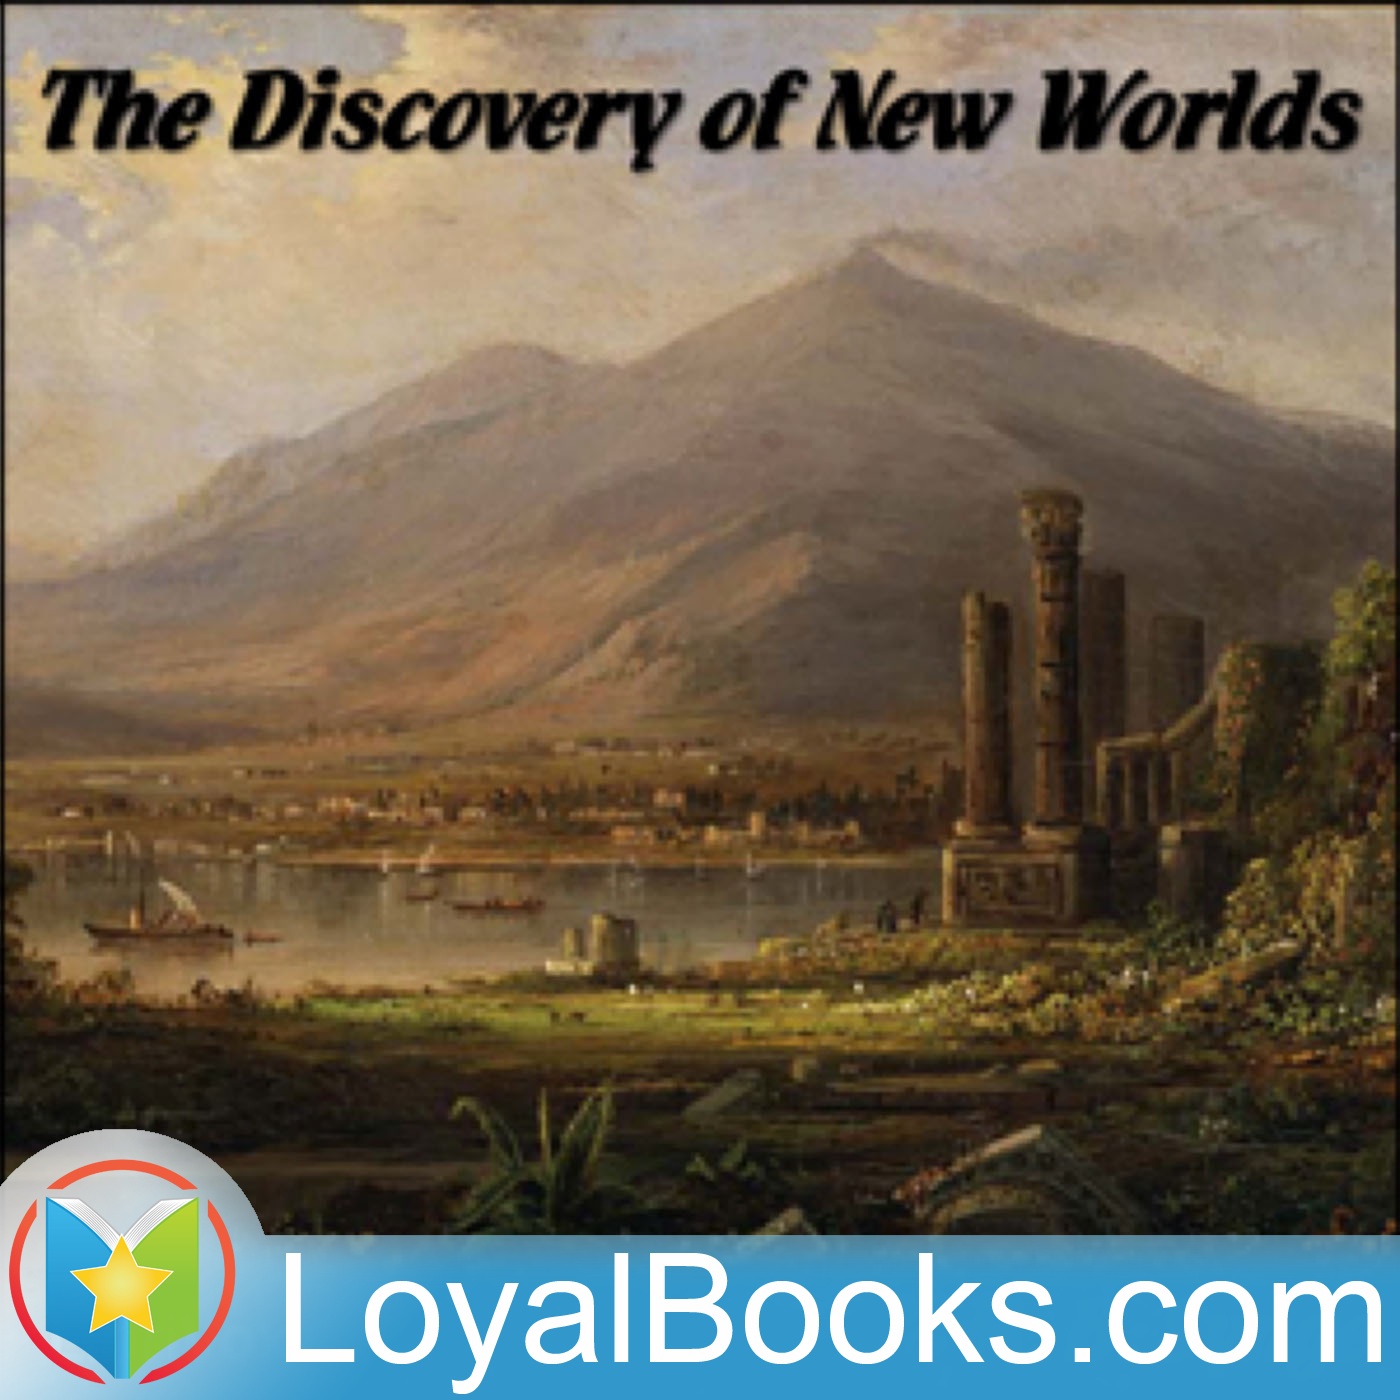 The Discovery of New Worlds by M. B. Synge